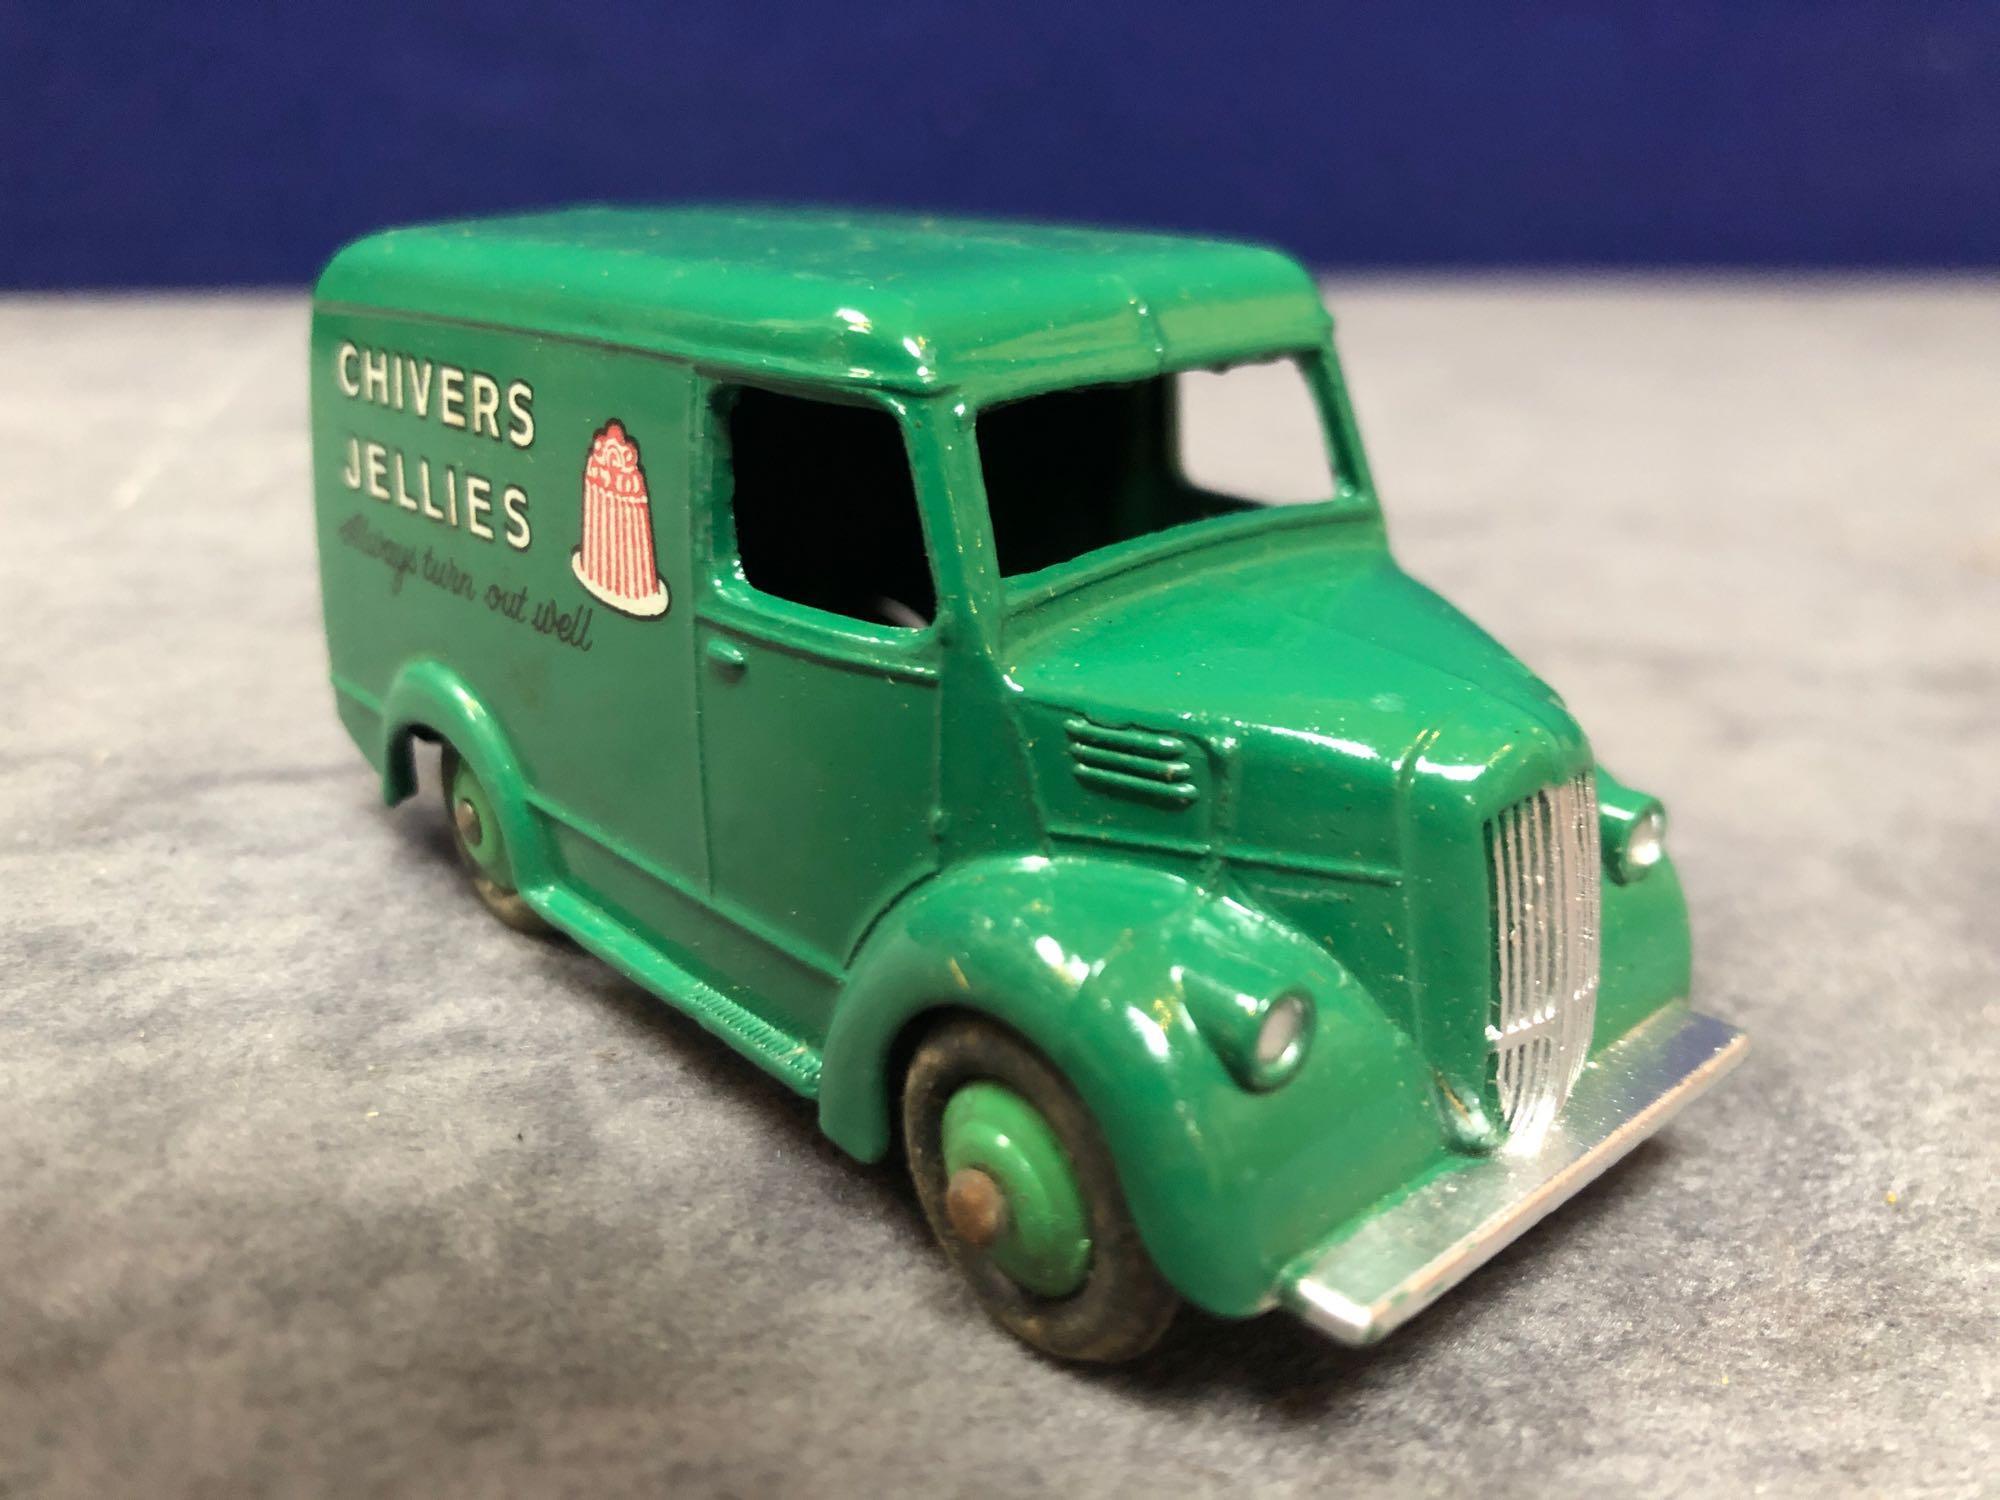 Dinky #452 Trojan 15cwt Van (Chivers) Green Model Is Mint Has A Slight Mark On Roof In A Solid - Image 2 of 4